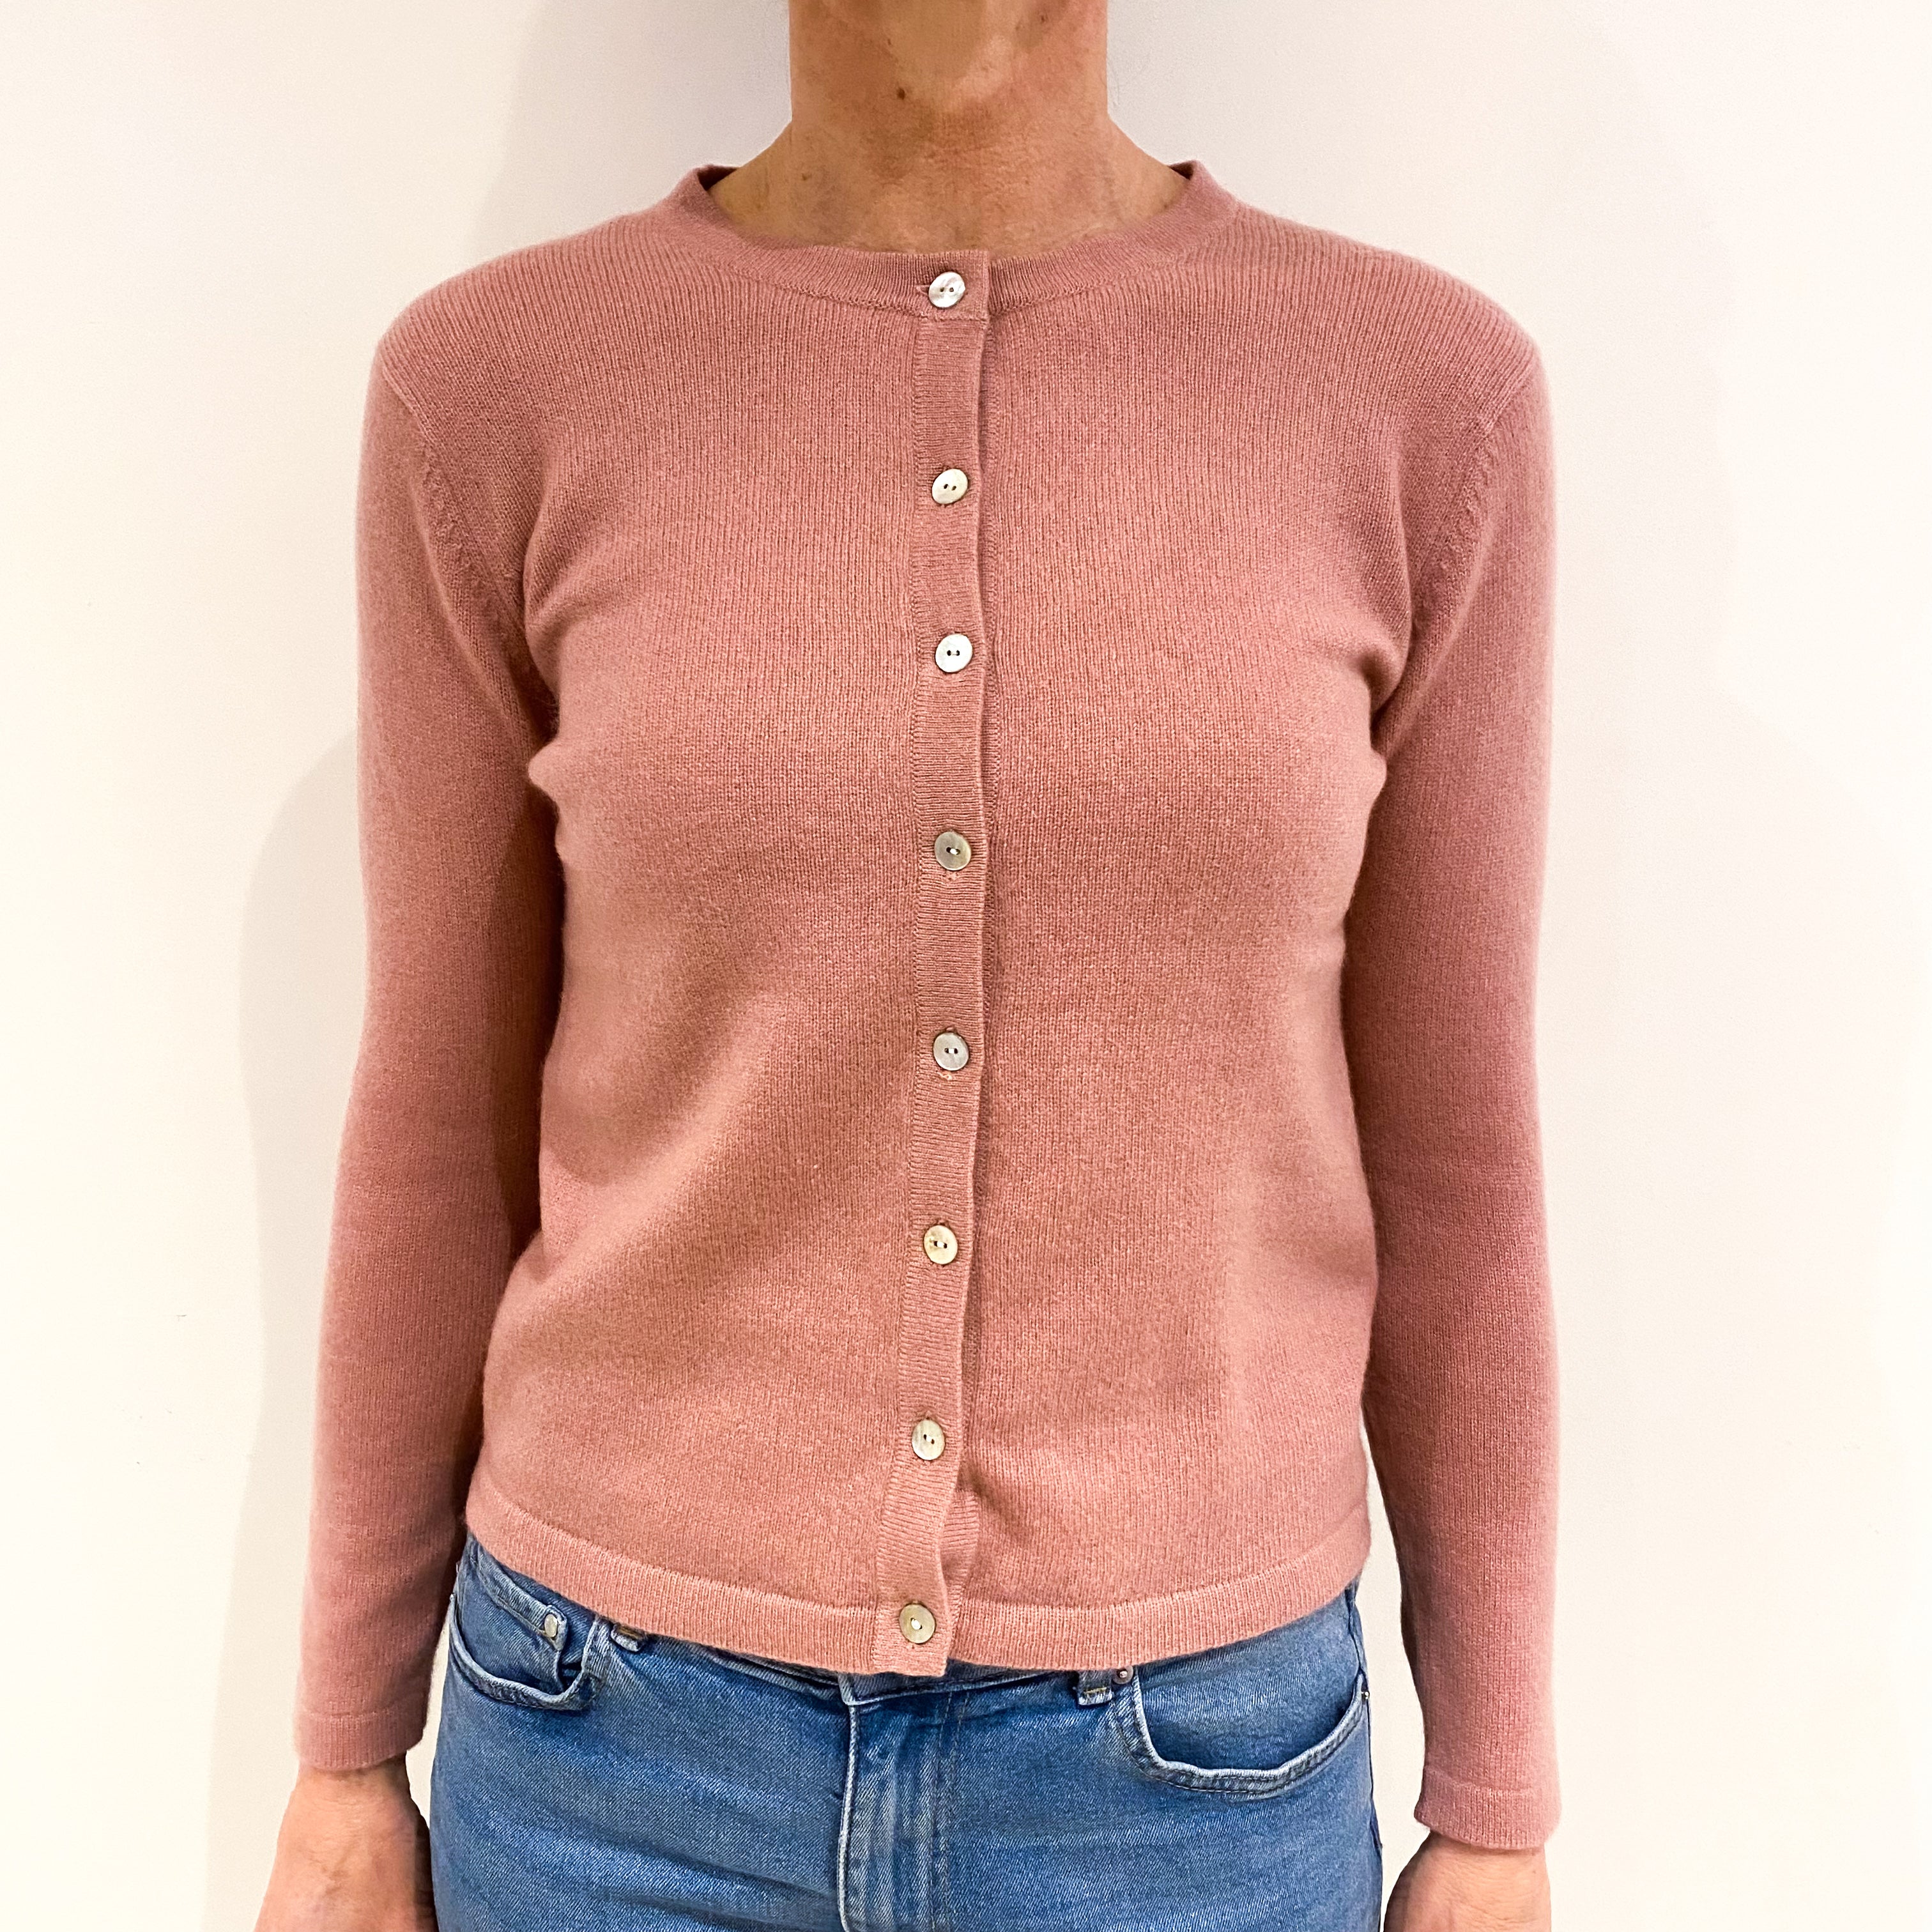 Faded Heather Pink Cashmere Crew Neck Cardigan Small